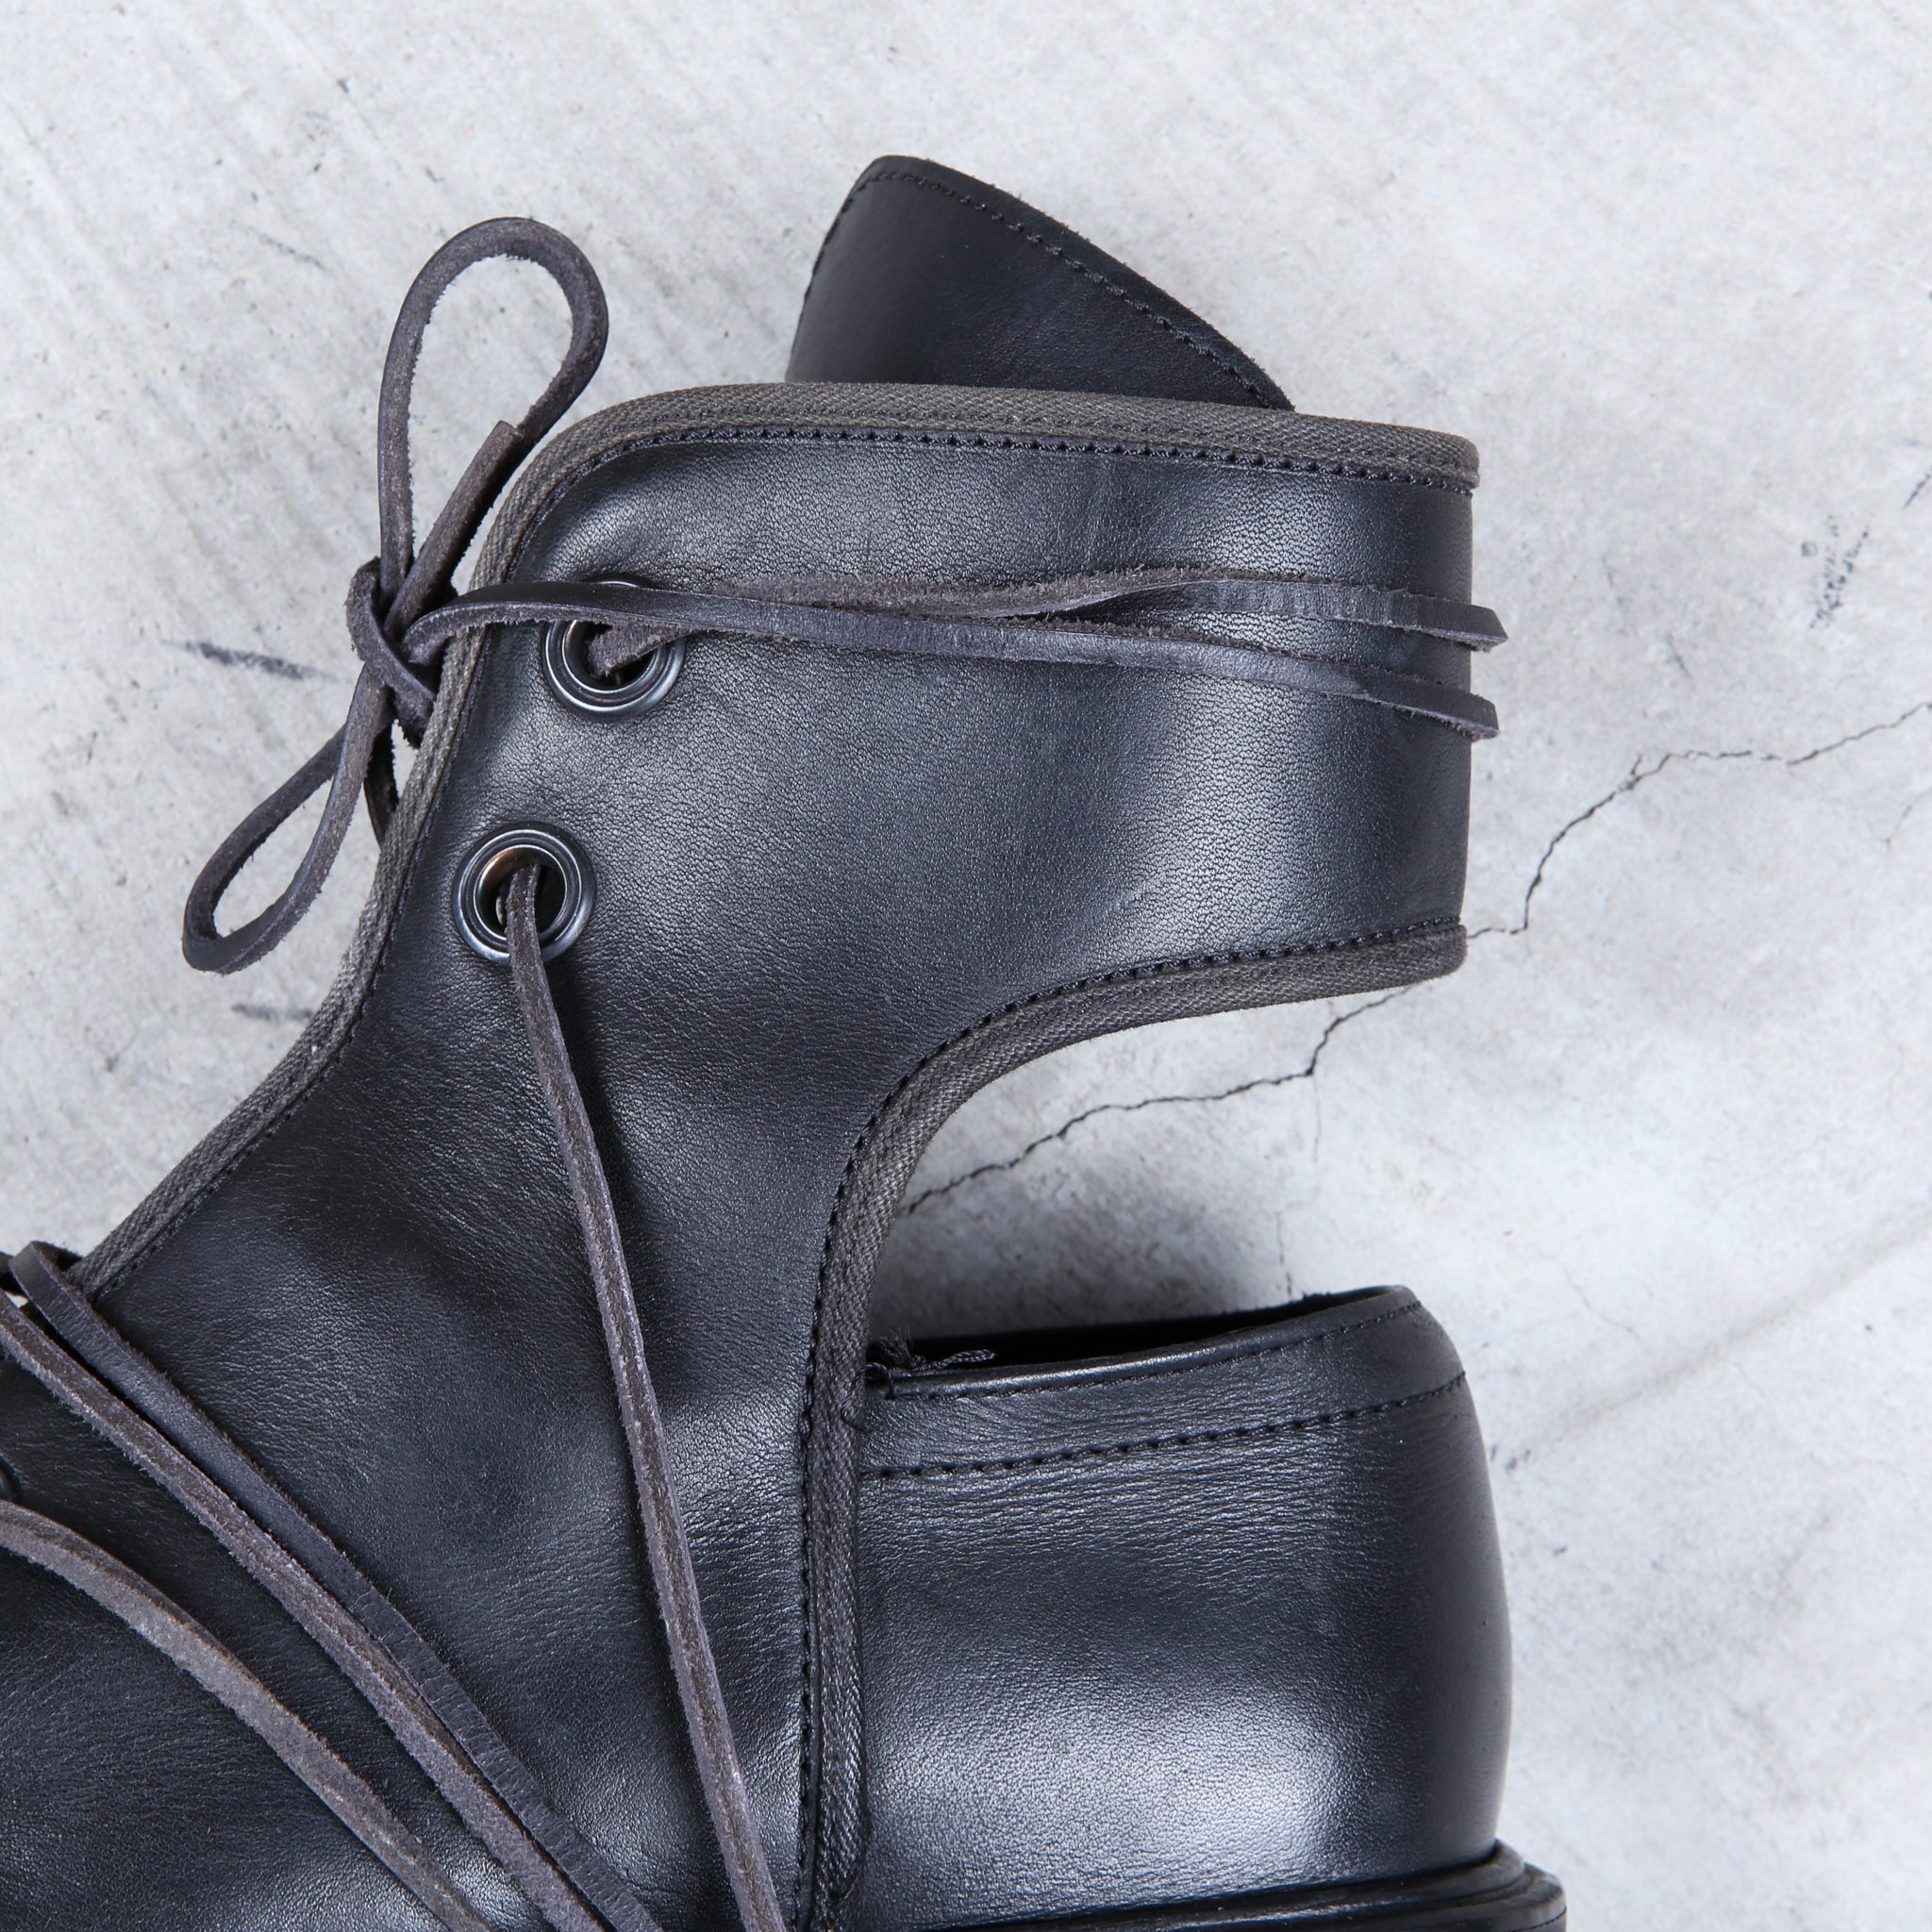 Dirk Bikkembergs Cut out Lace through Mountaineering Boots